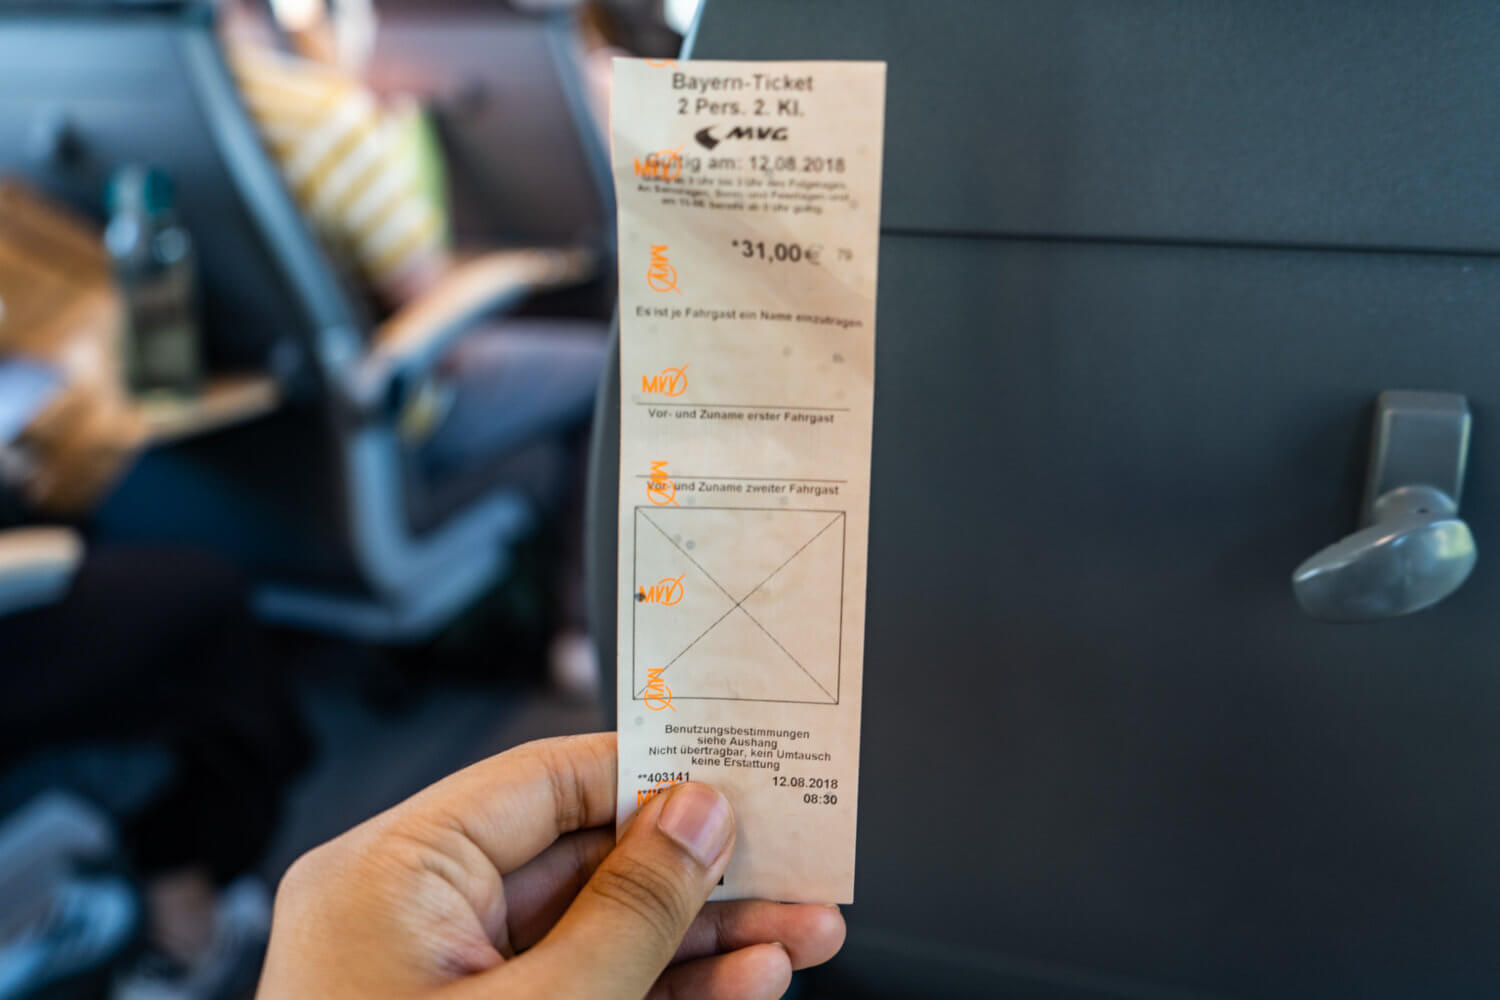 Bayern ticket for two people held out in a train